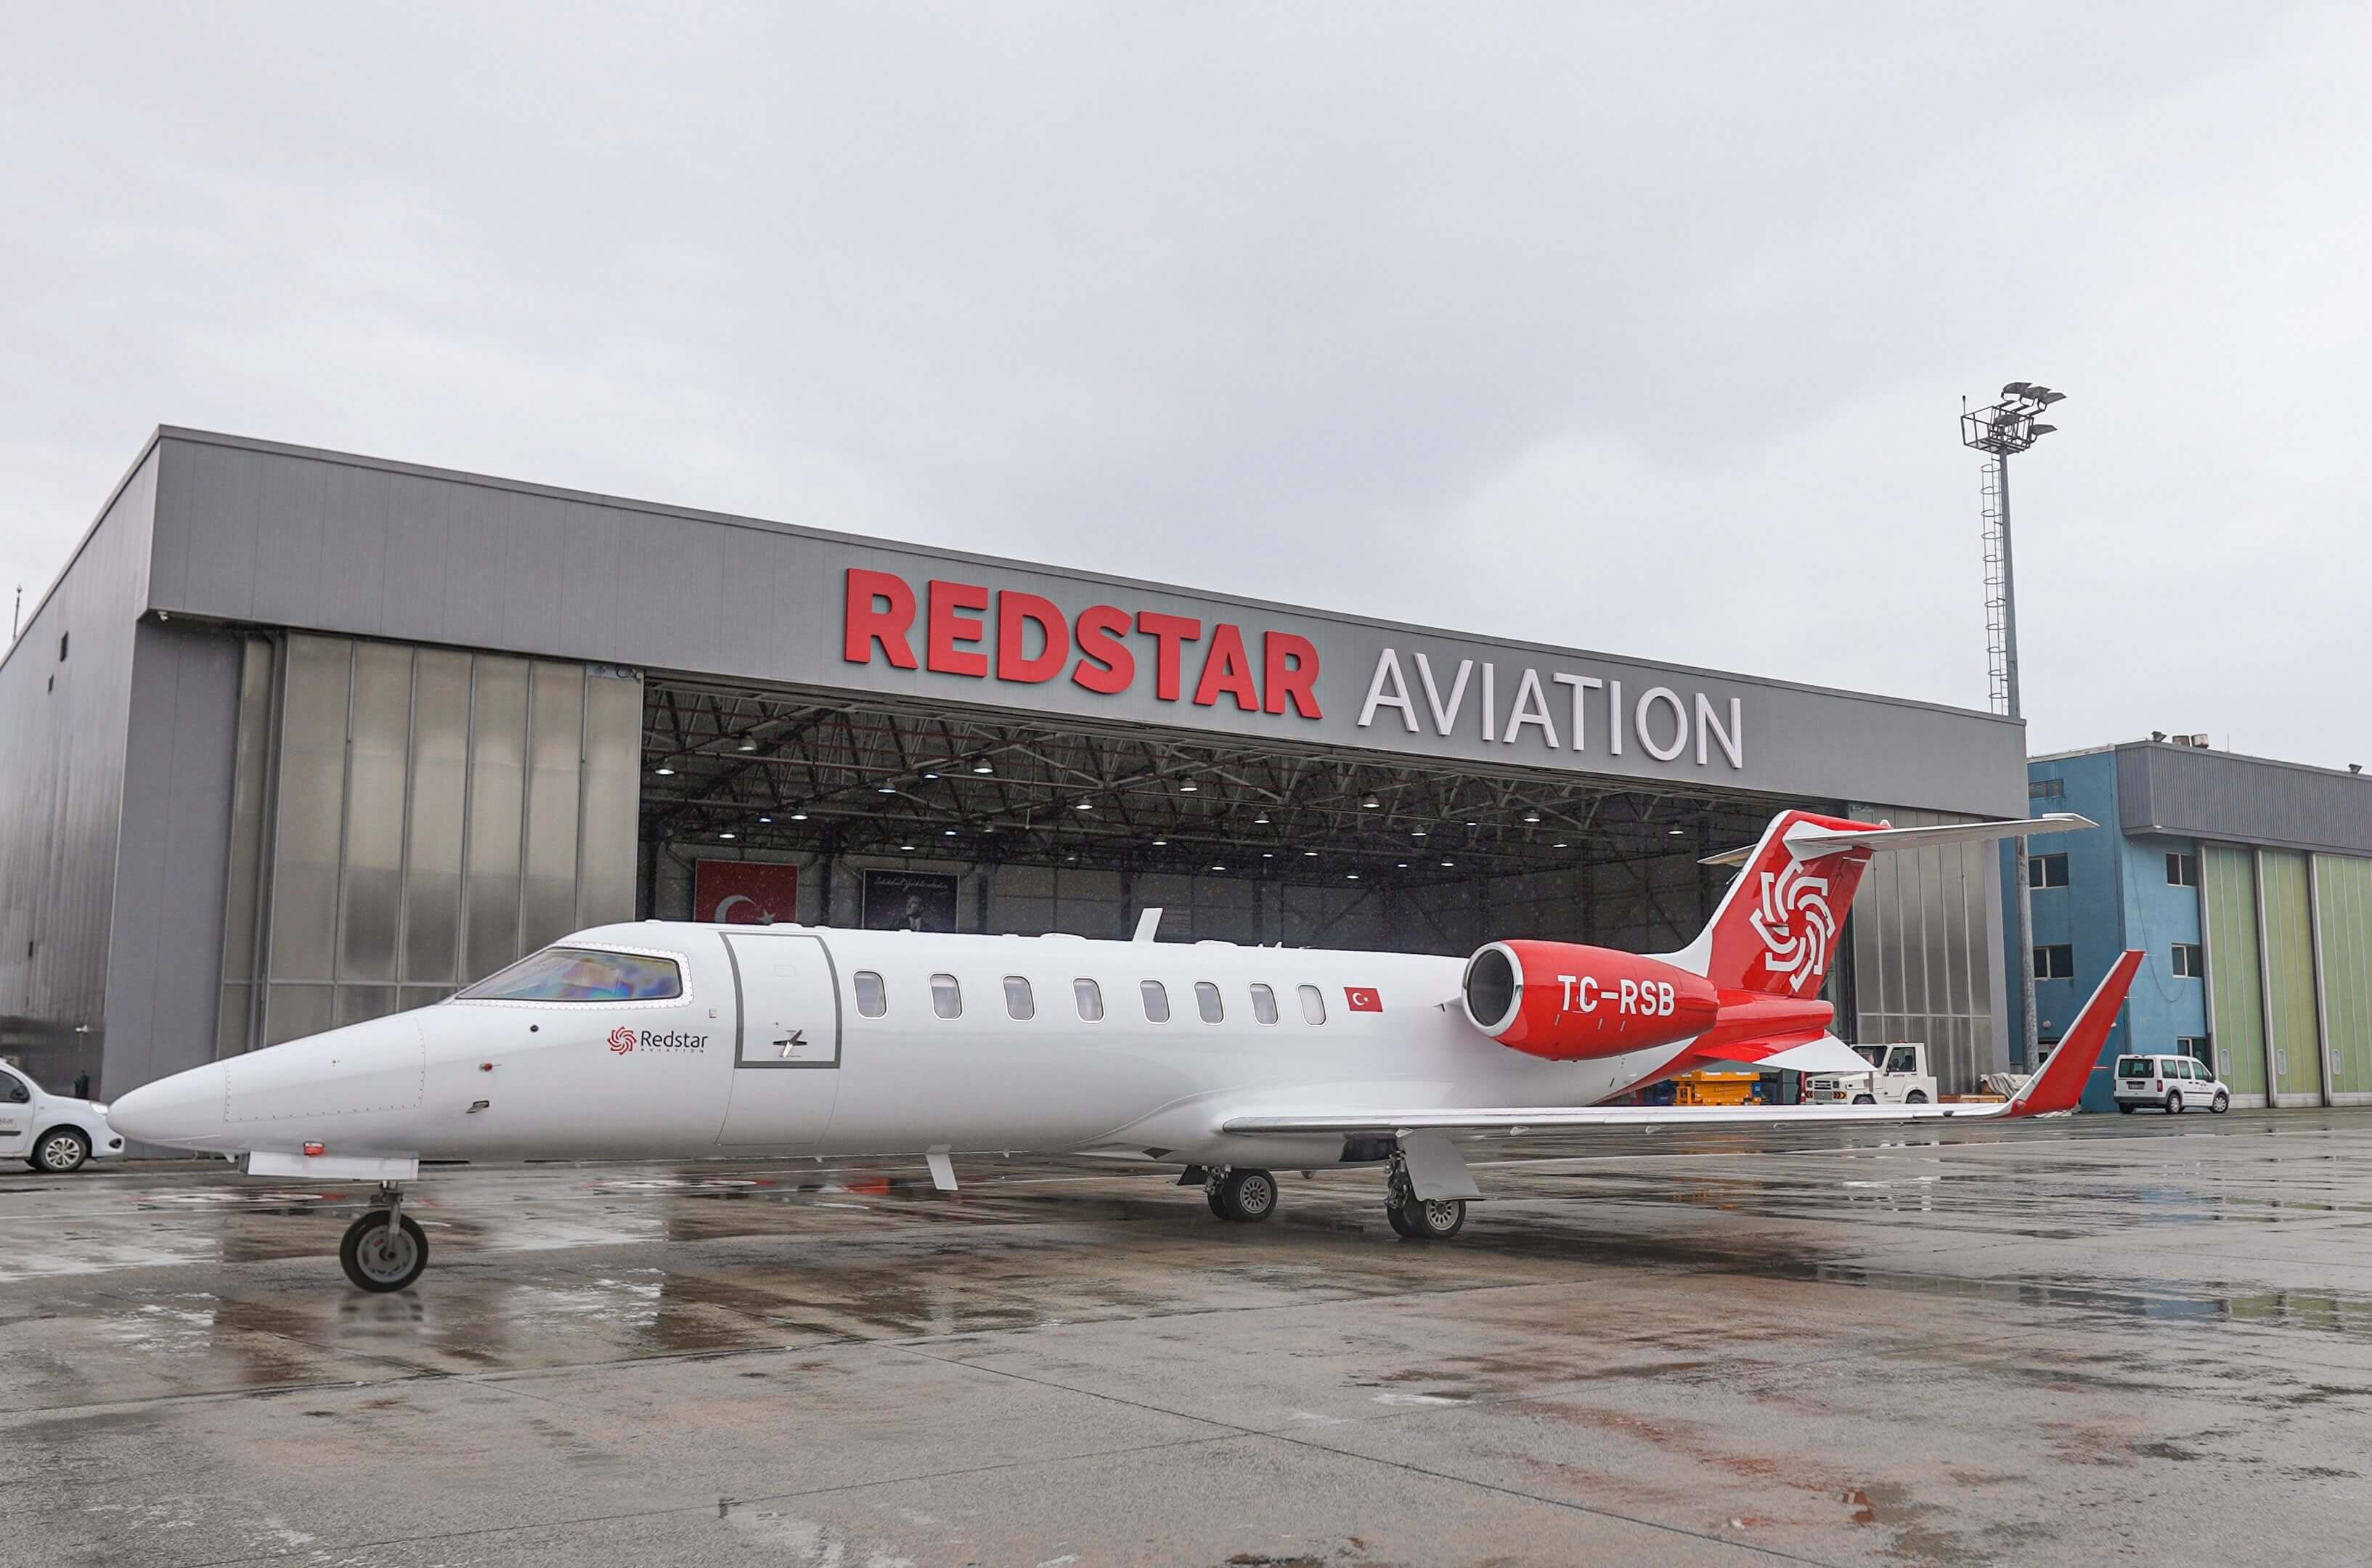 Proudly Presenting Our New Branded Aircraft Livery